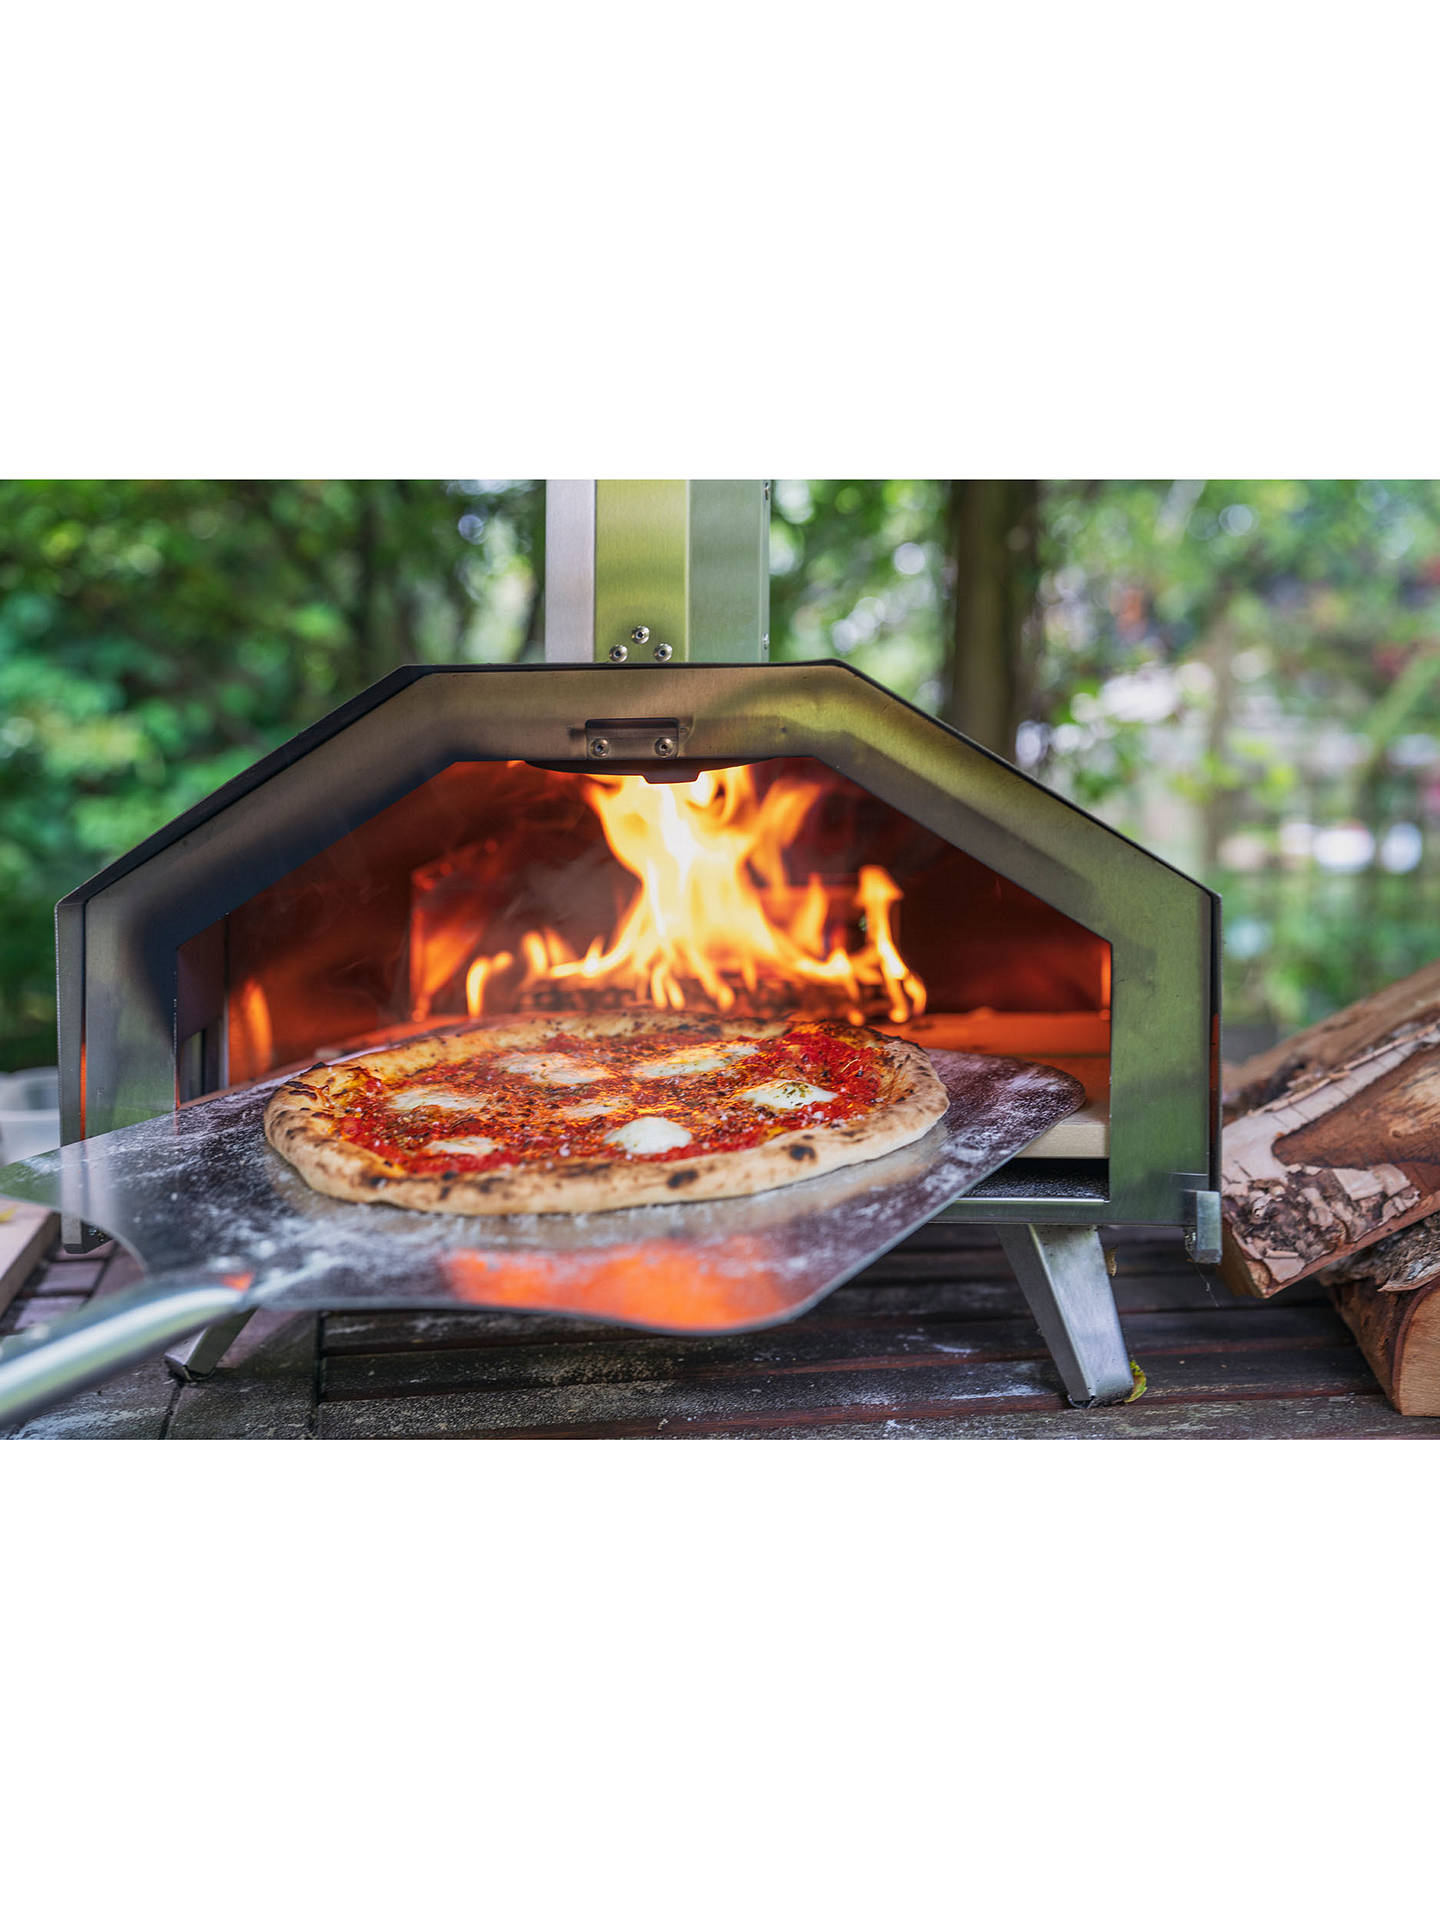 Outdoor Pizza Oven Kits For Sale Uk